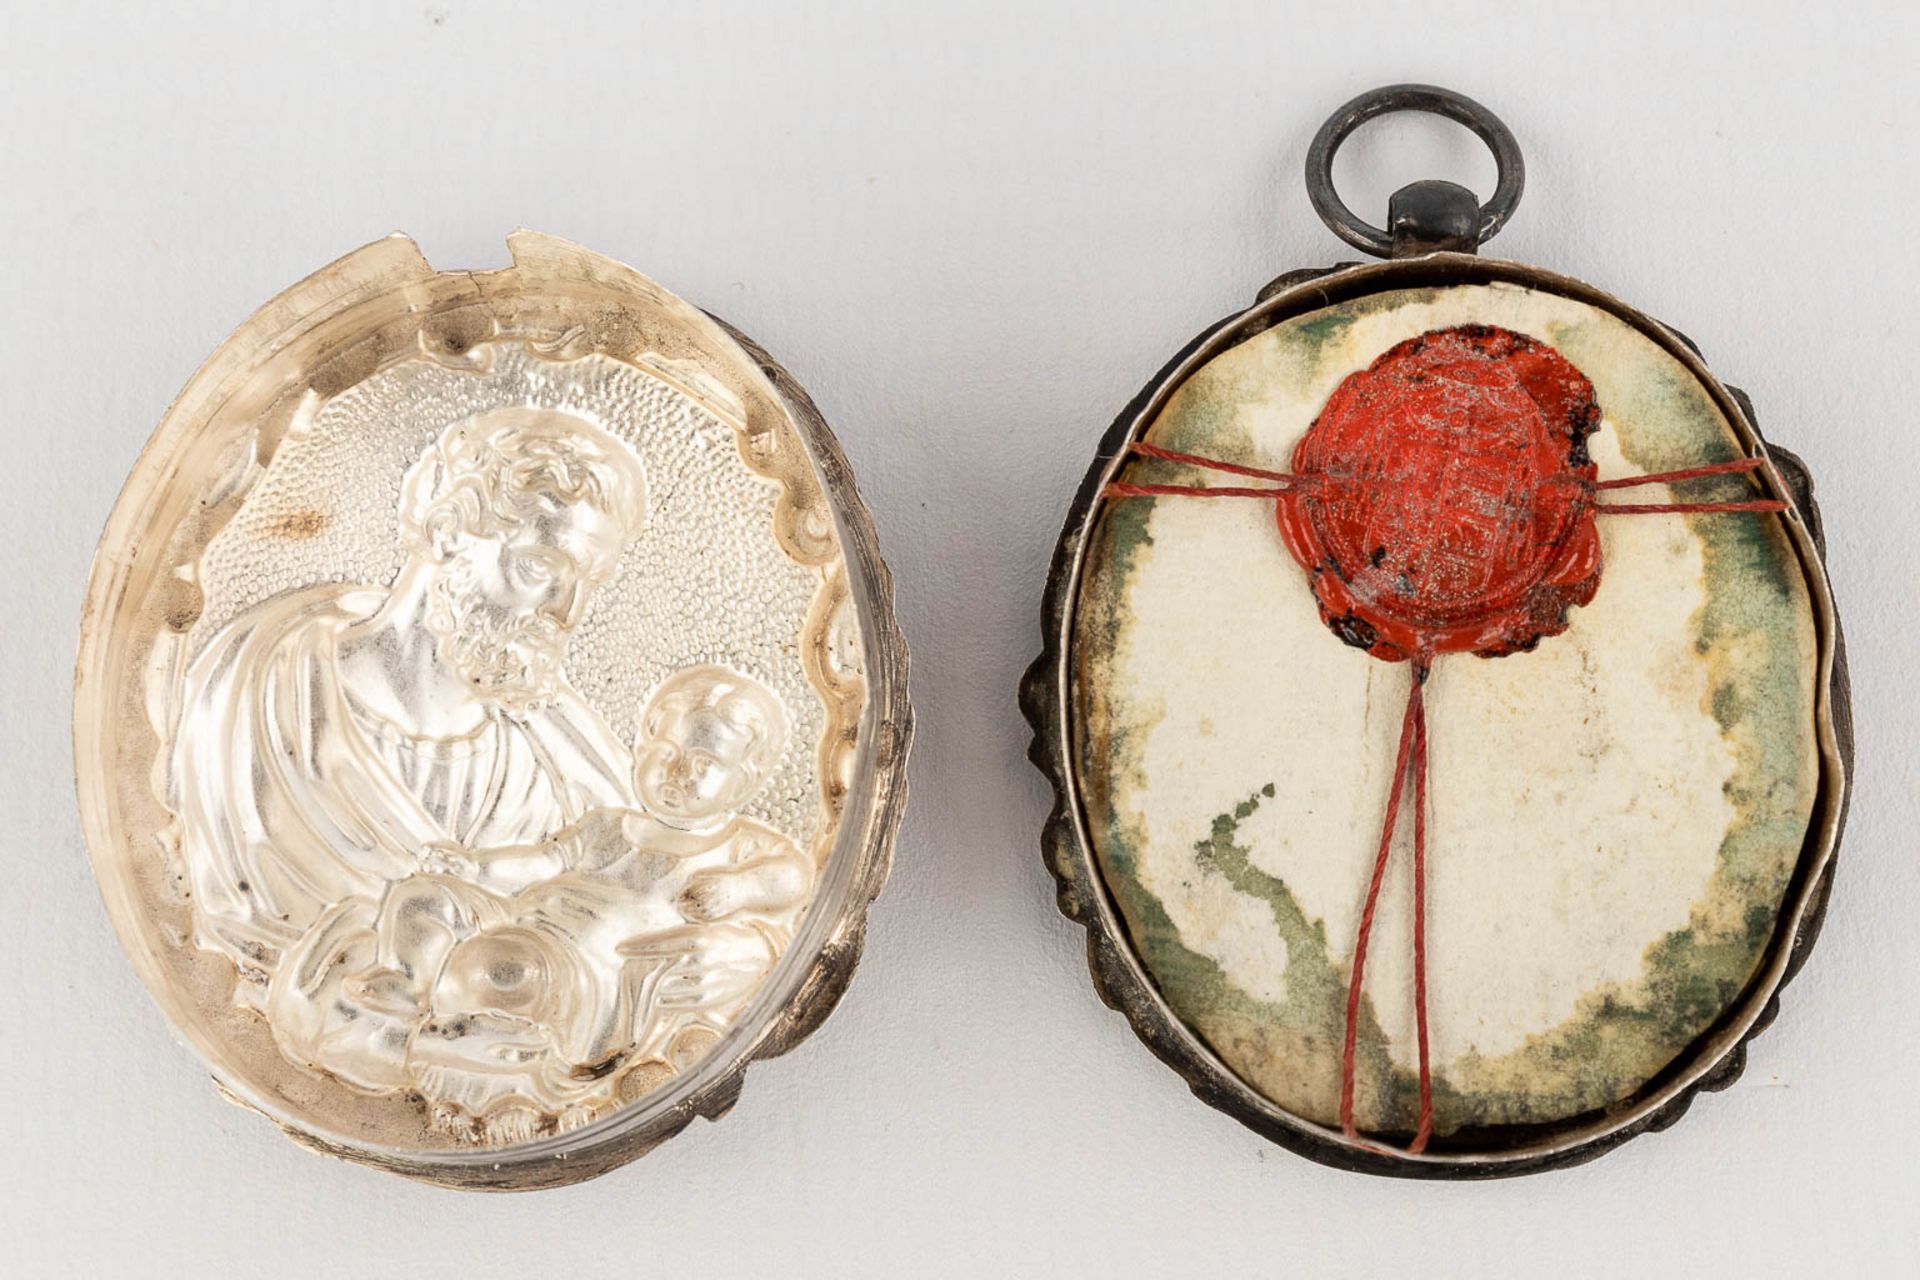 A set of 5 relics in a silver theca, with a repousse image of Joseph and Jesus. 19th century. (W: 4 - Image 9 of 10